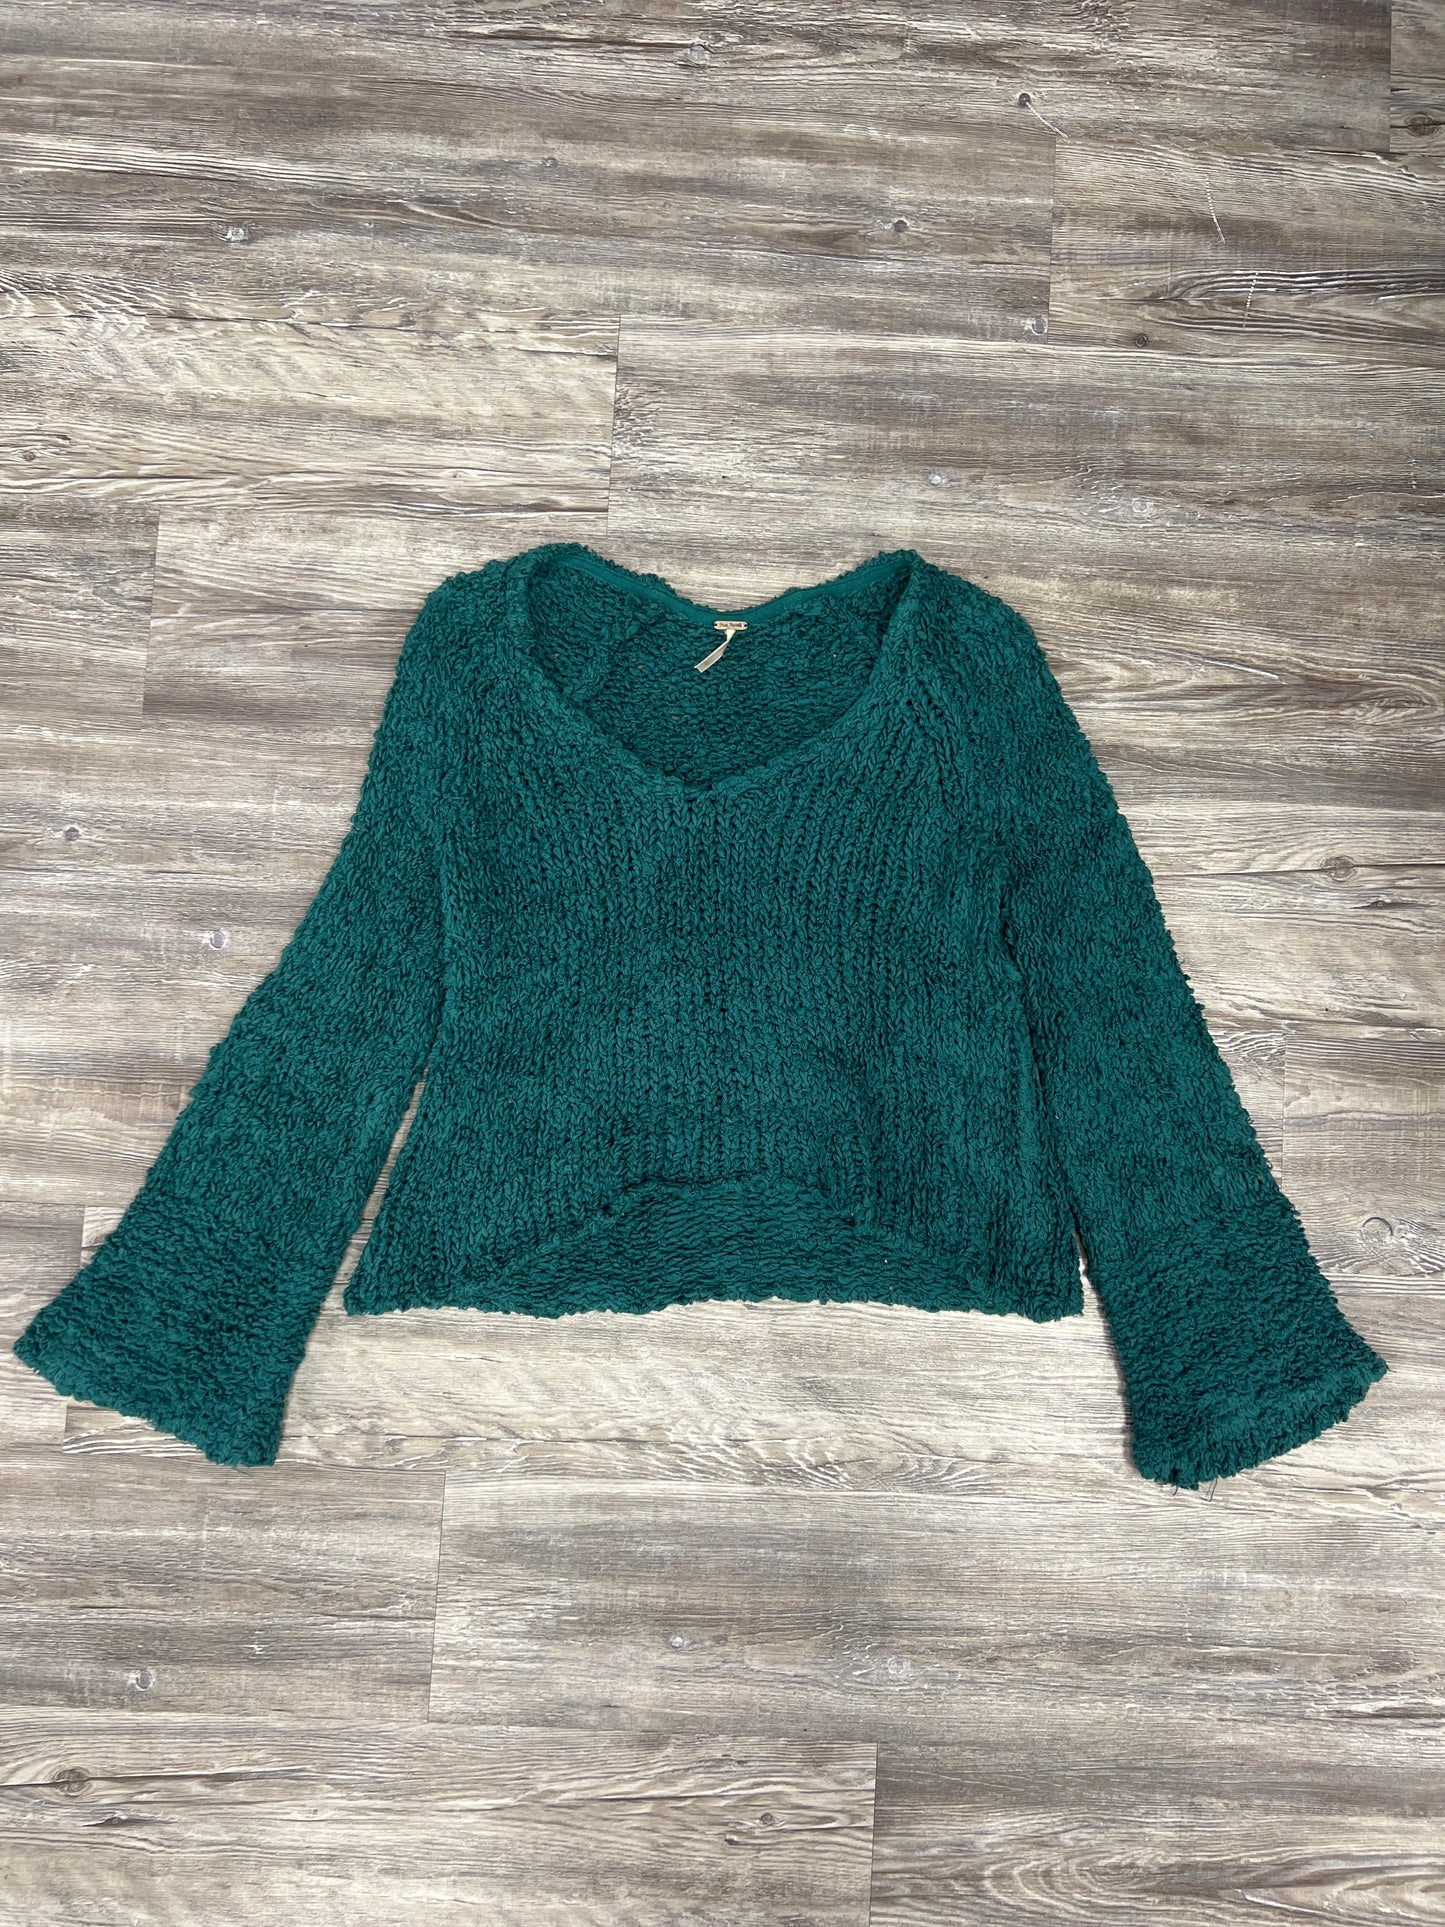 Teal Sweater Free People, Size S